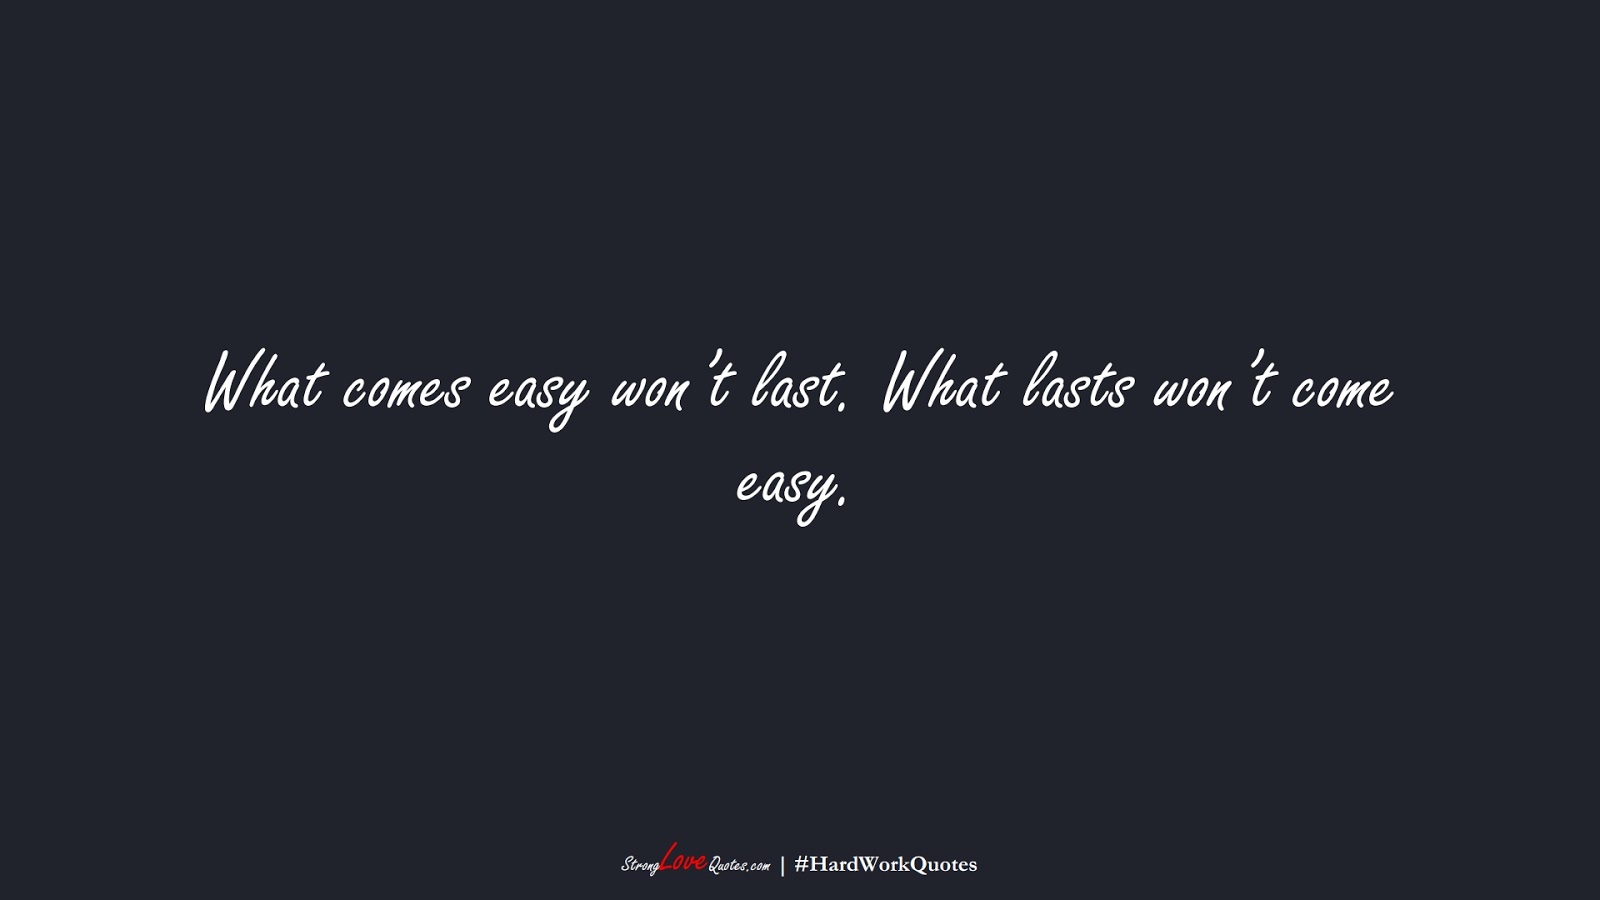 What comes easy won’t last. What lasts won’t come easy.FALSE